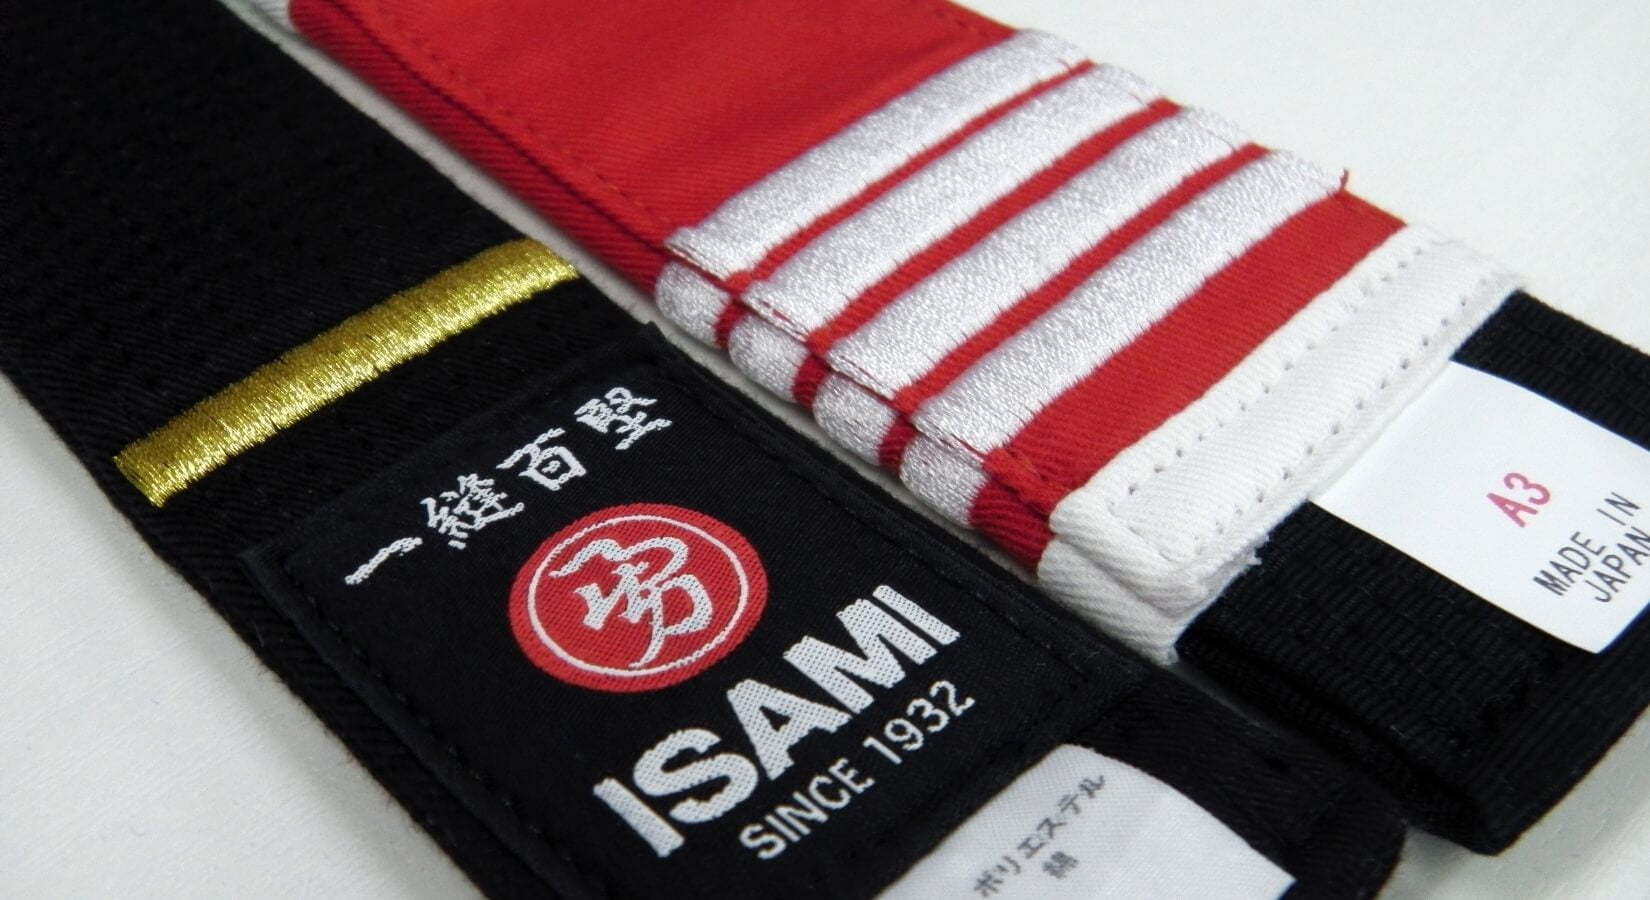 Embroidered dan stripes on Isami belts